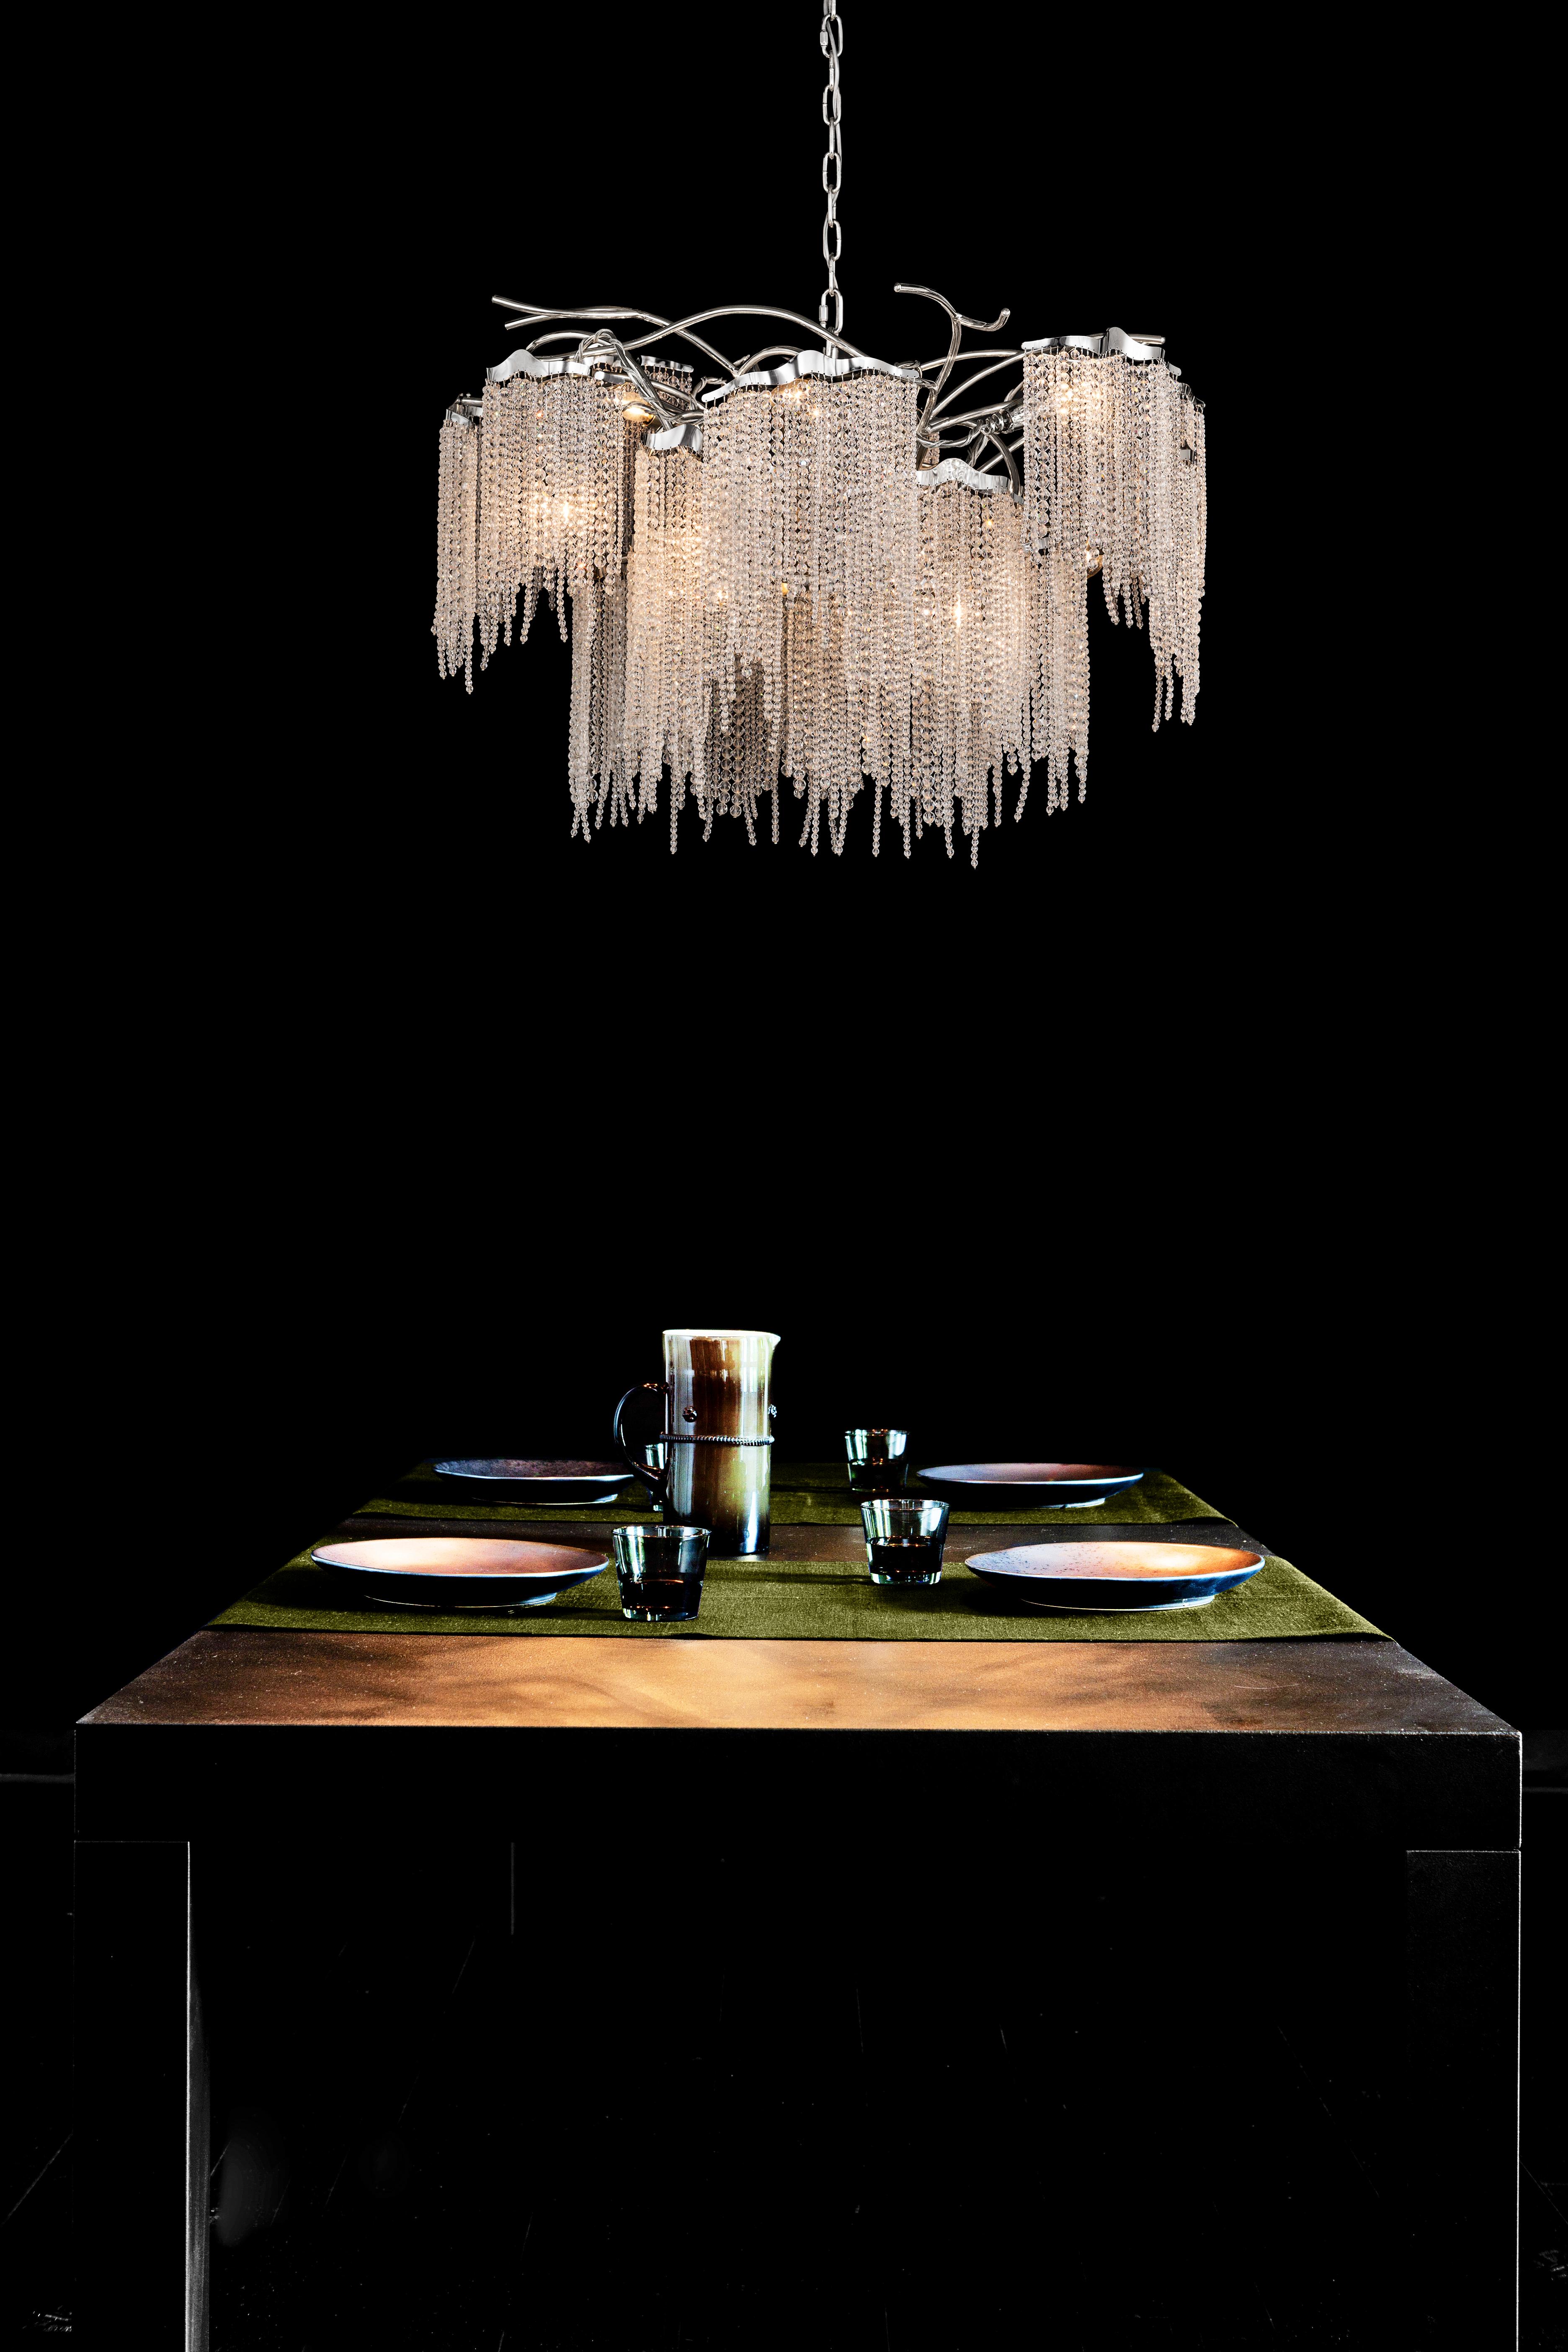 This modern chandelier in a round shape and in a nickel finish with crystals, is part of the Victoria collection, designed by William Brand of Brand van Egmond.

Before you see it, the sparkling light reaches your eyes in full splendour. The fresh